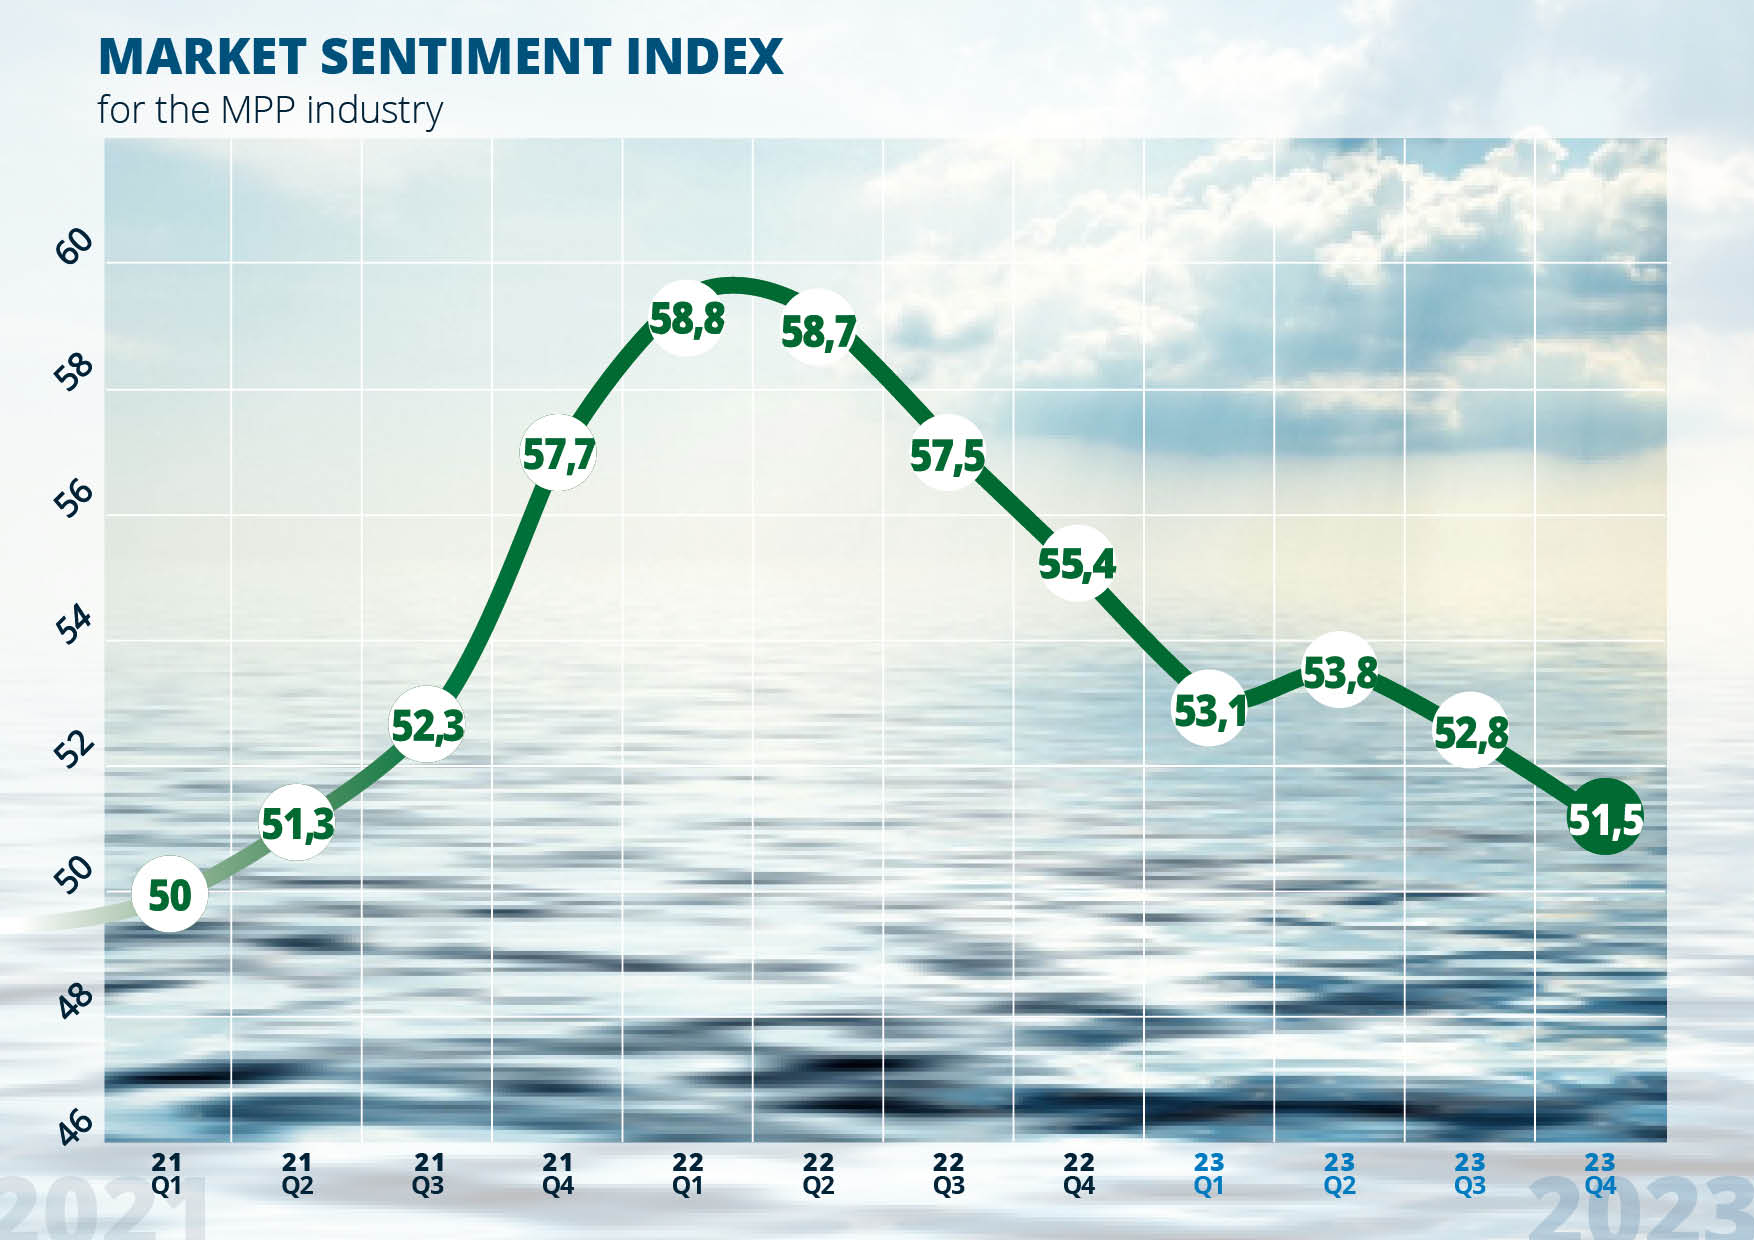 MPP sentiment index hits lowest point since inaugural edition